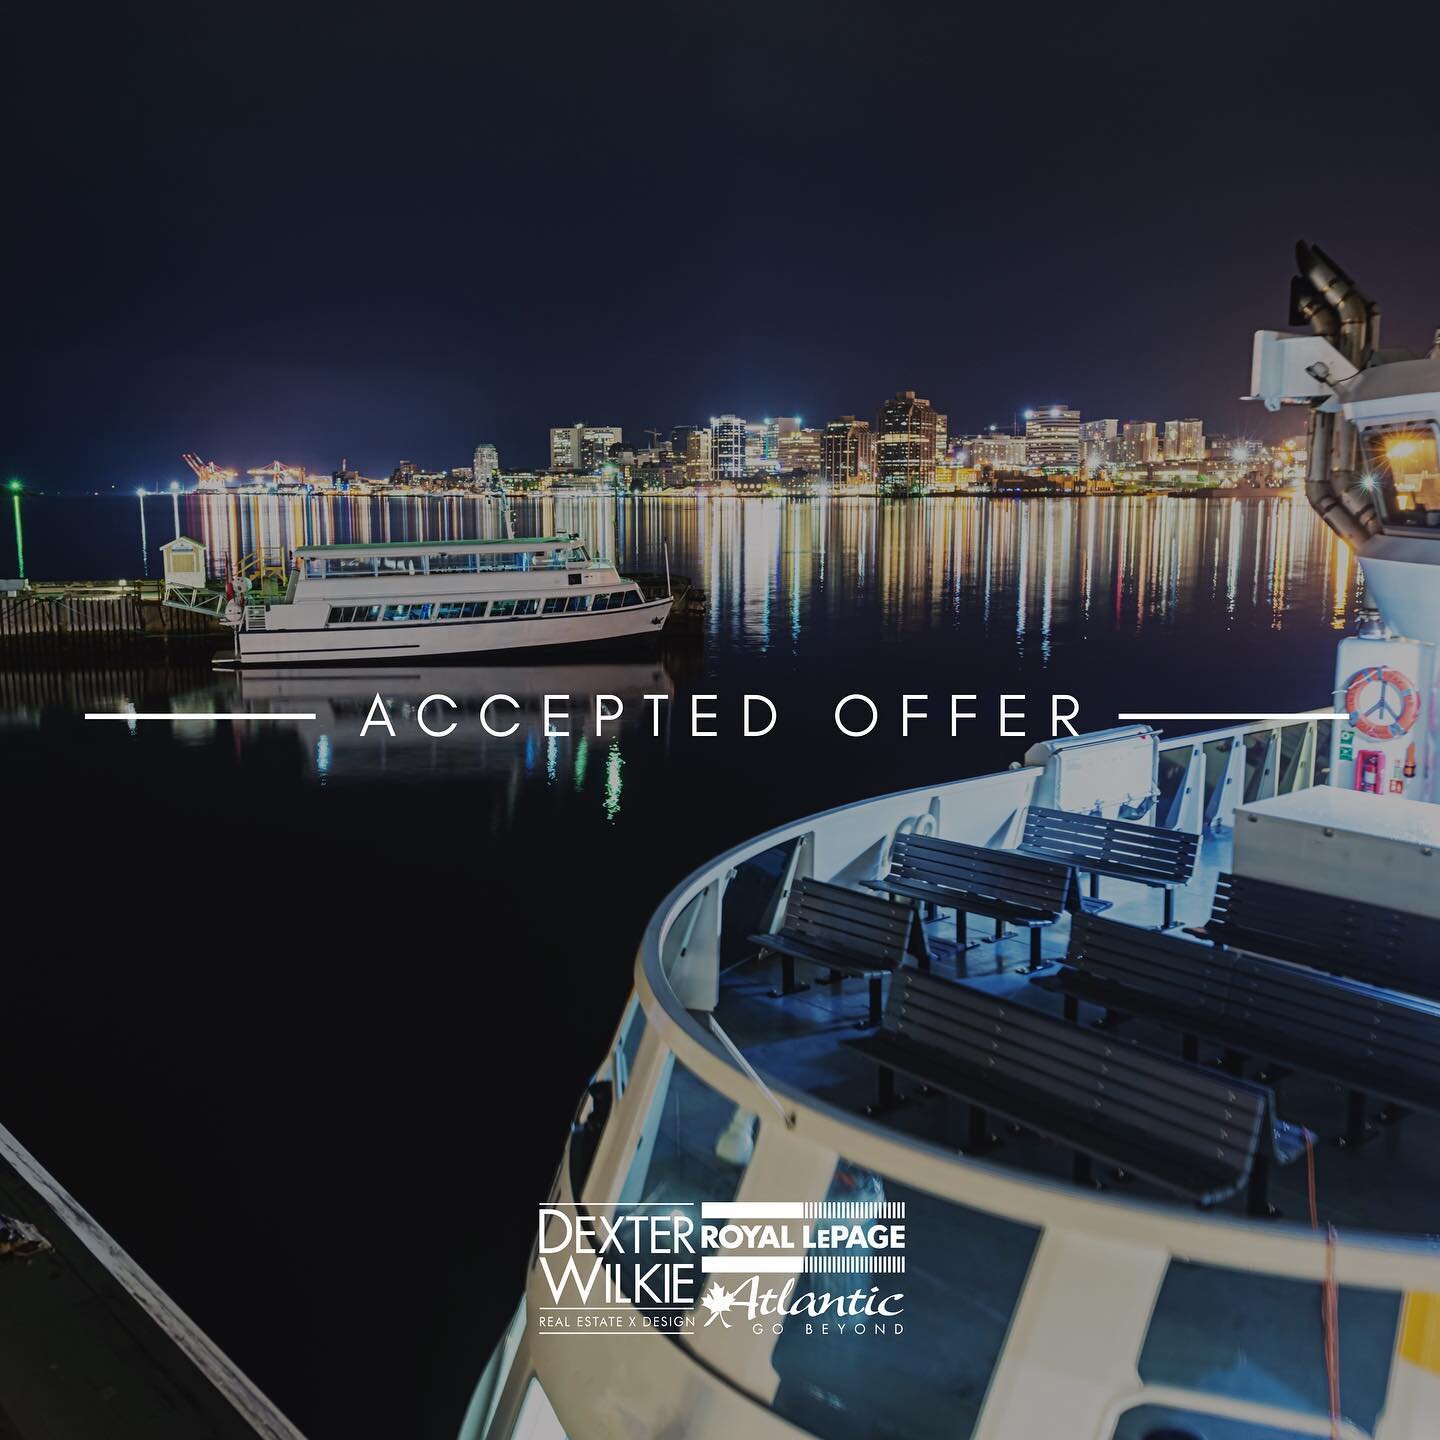 A double Accepted Offer completes the day! One for my savvy investors in #Dartmouth and another for my awesome first time home buyers in #Bedford

Let&rsquo;s get to those conditions! 

📱1.902.314.9686 
📧dexter@dexterwilkie.com 
👨🏻&zwj;💻www.dext